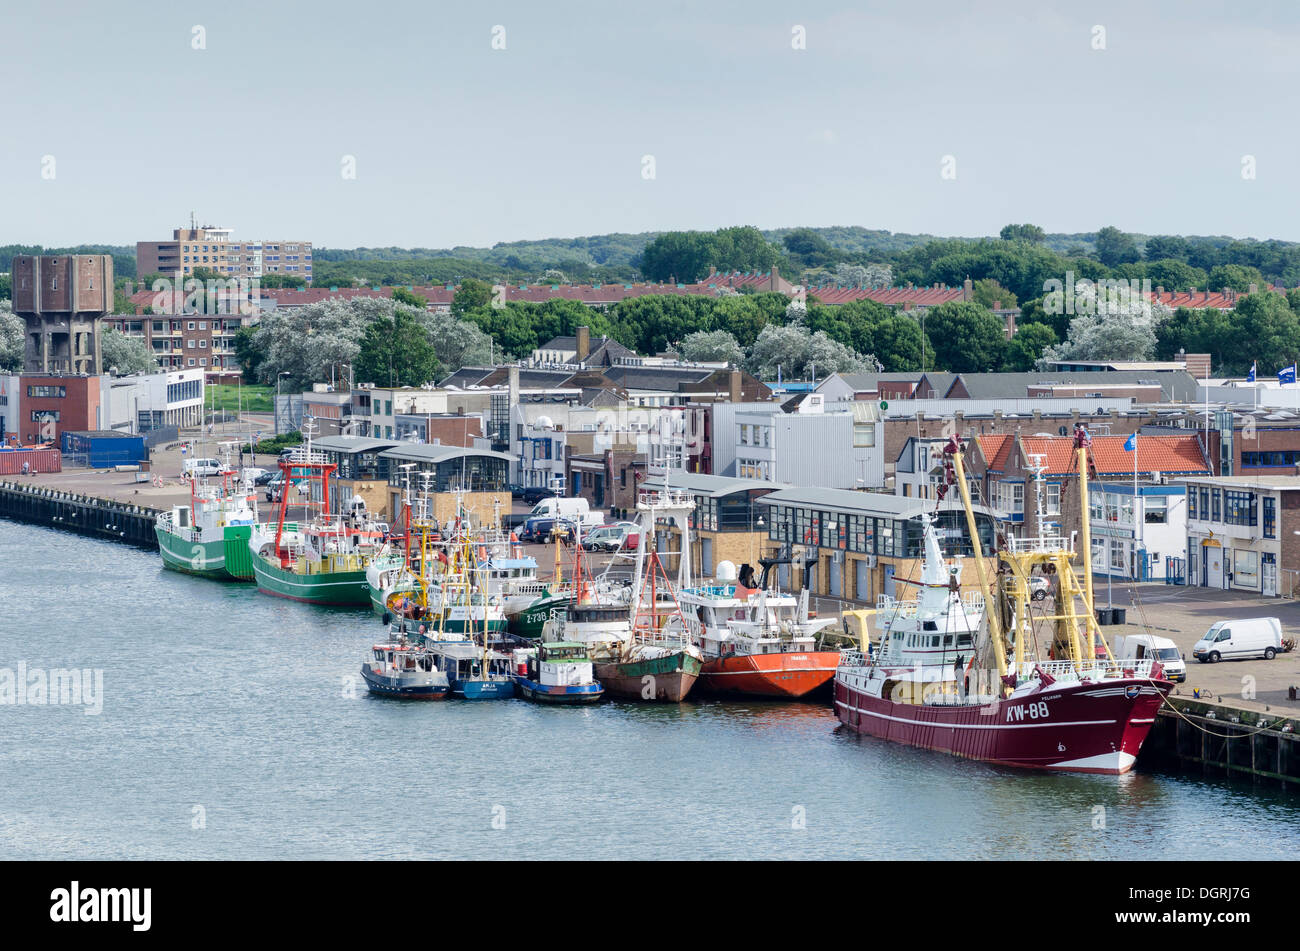 Harbor of Ijmuiden with moored fishing boats or trawlers and tugboats, North Holland, the Netherlands, Europe Stock Photo